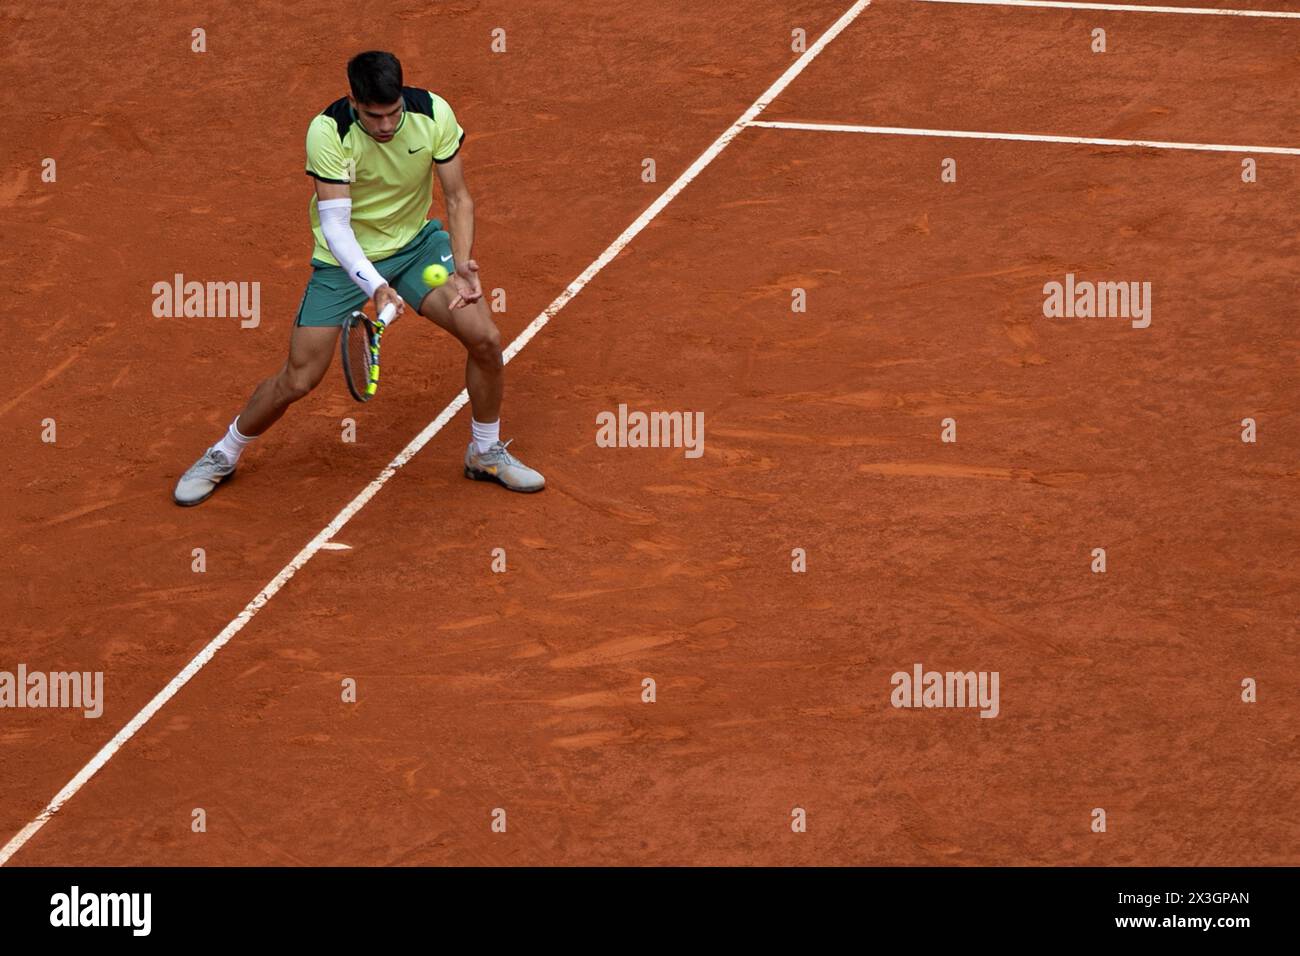 Madrid, Spain. 26th Apr, 2024. Carlos Alcaraz in a play during this afternoon's tennis match at the Caja Magica in Madrid. Carlos Alcaraz defeated Kazakh Alexander Shevchenko in two sets (2-6 and 1-6) at the Madrid Open tennis tournament. Credit: SOPA Images Limited/Alamy Live News Stock Photo